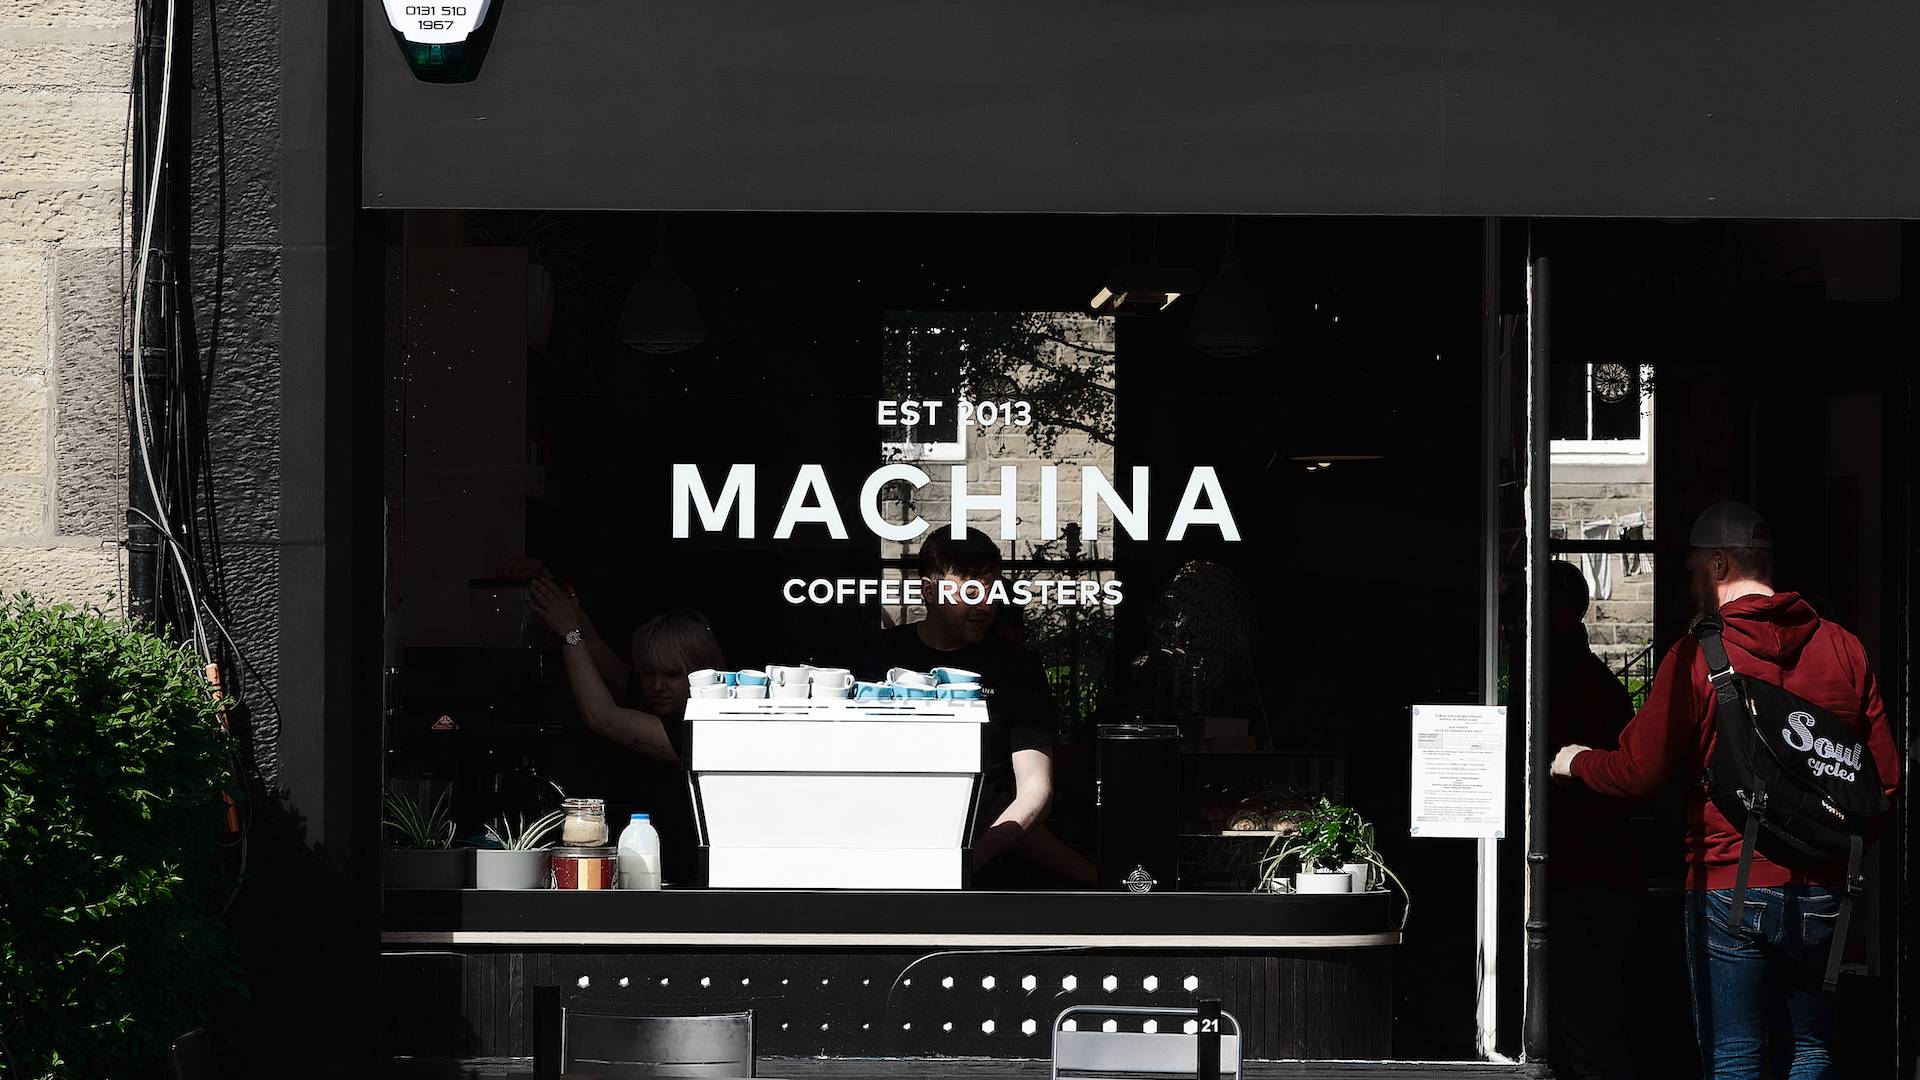 The shopfront for Machina Coffee. Black panelling with the company logo on the window in white., Machina Coffee